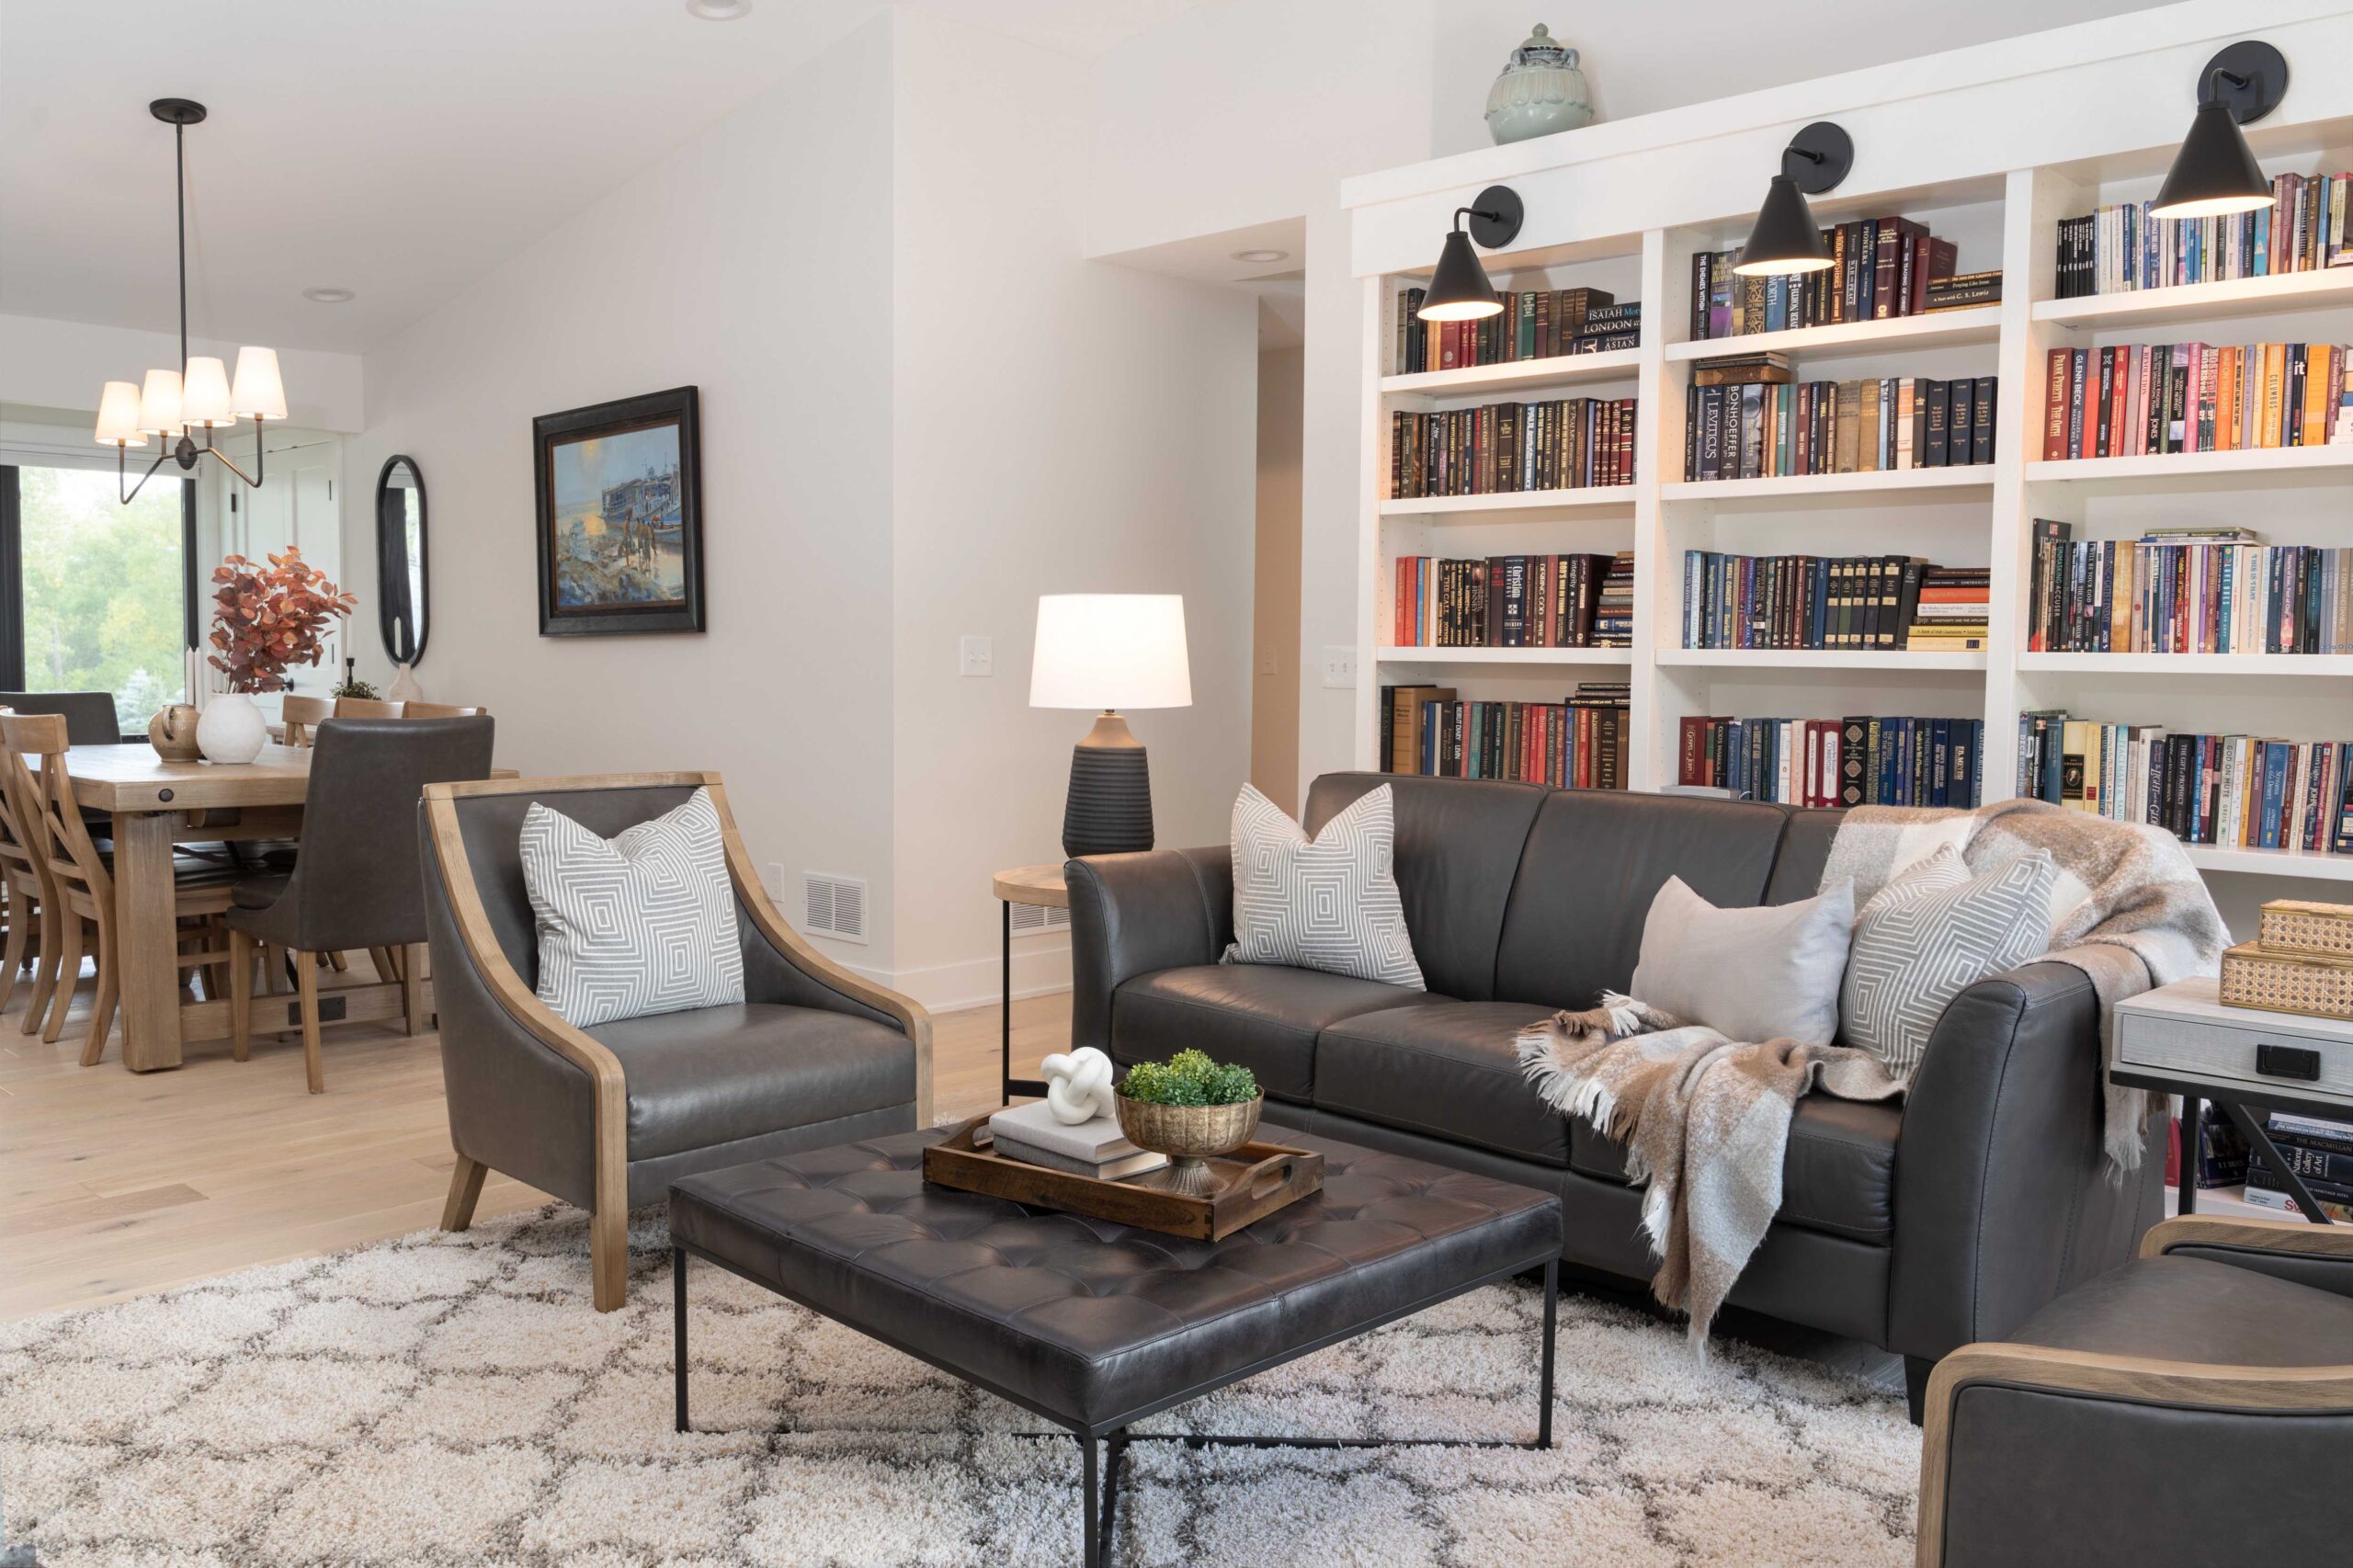 Orchard Lake Remodel: A living room with a coffee table and bookshelves.